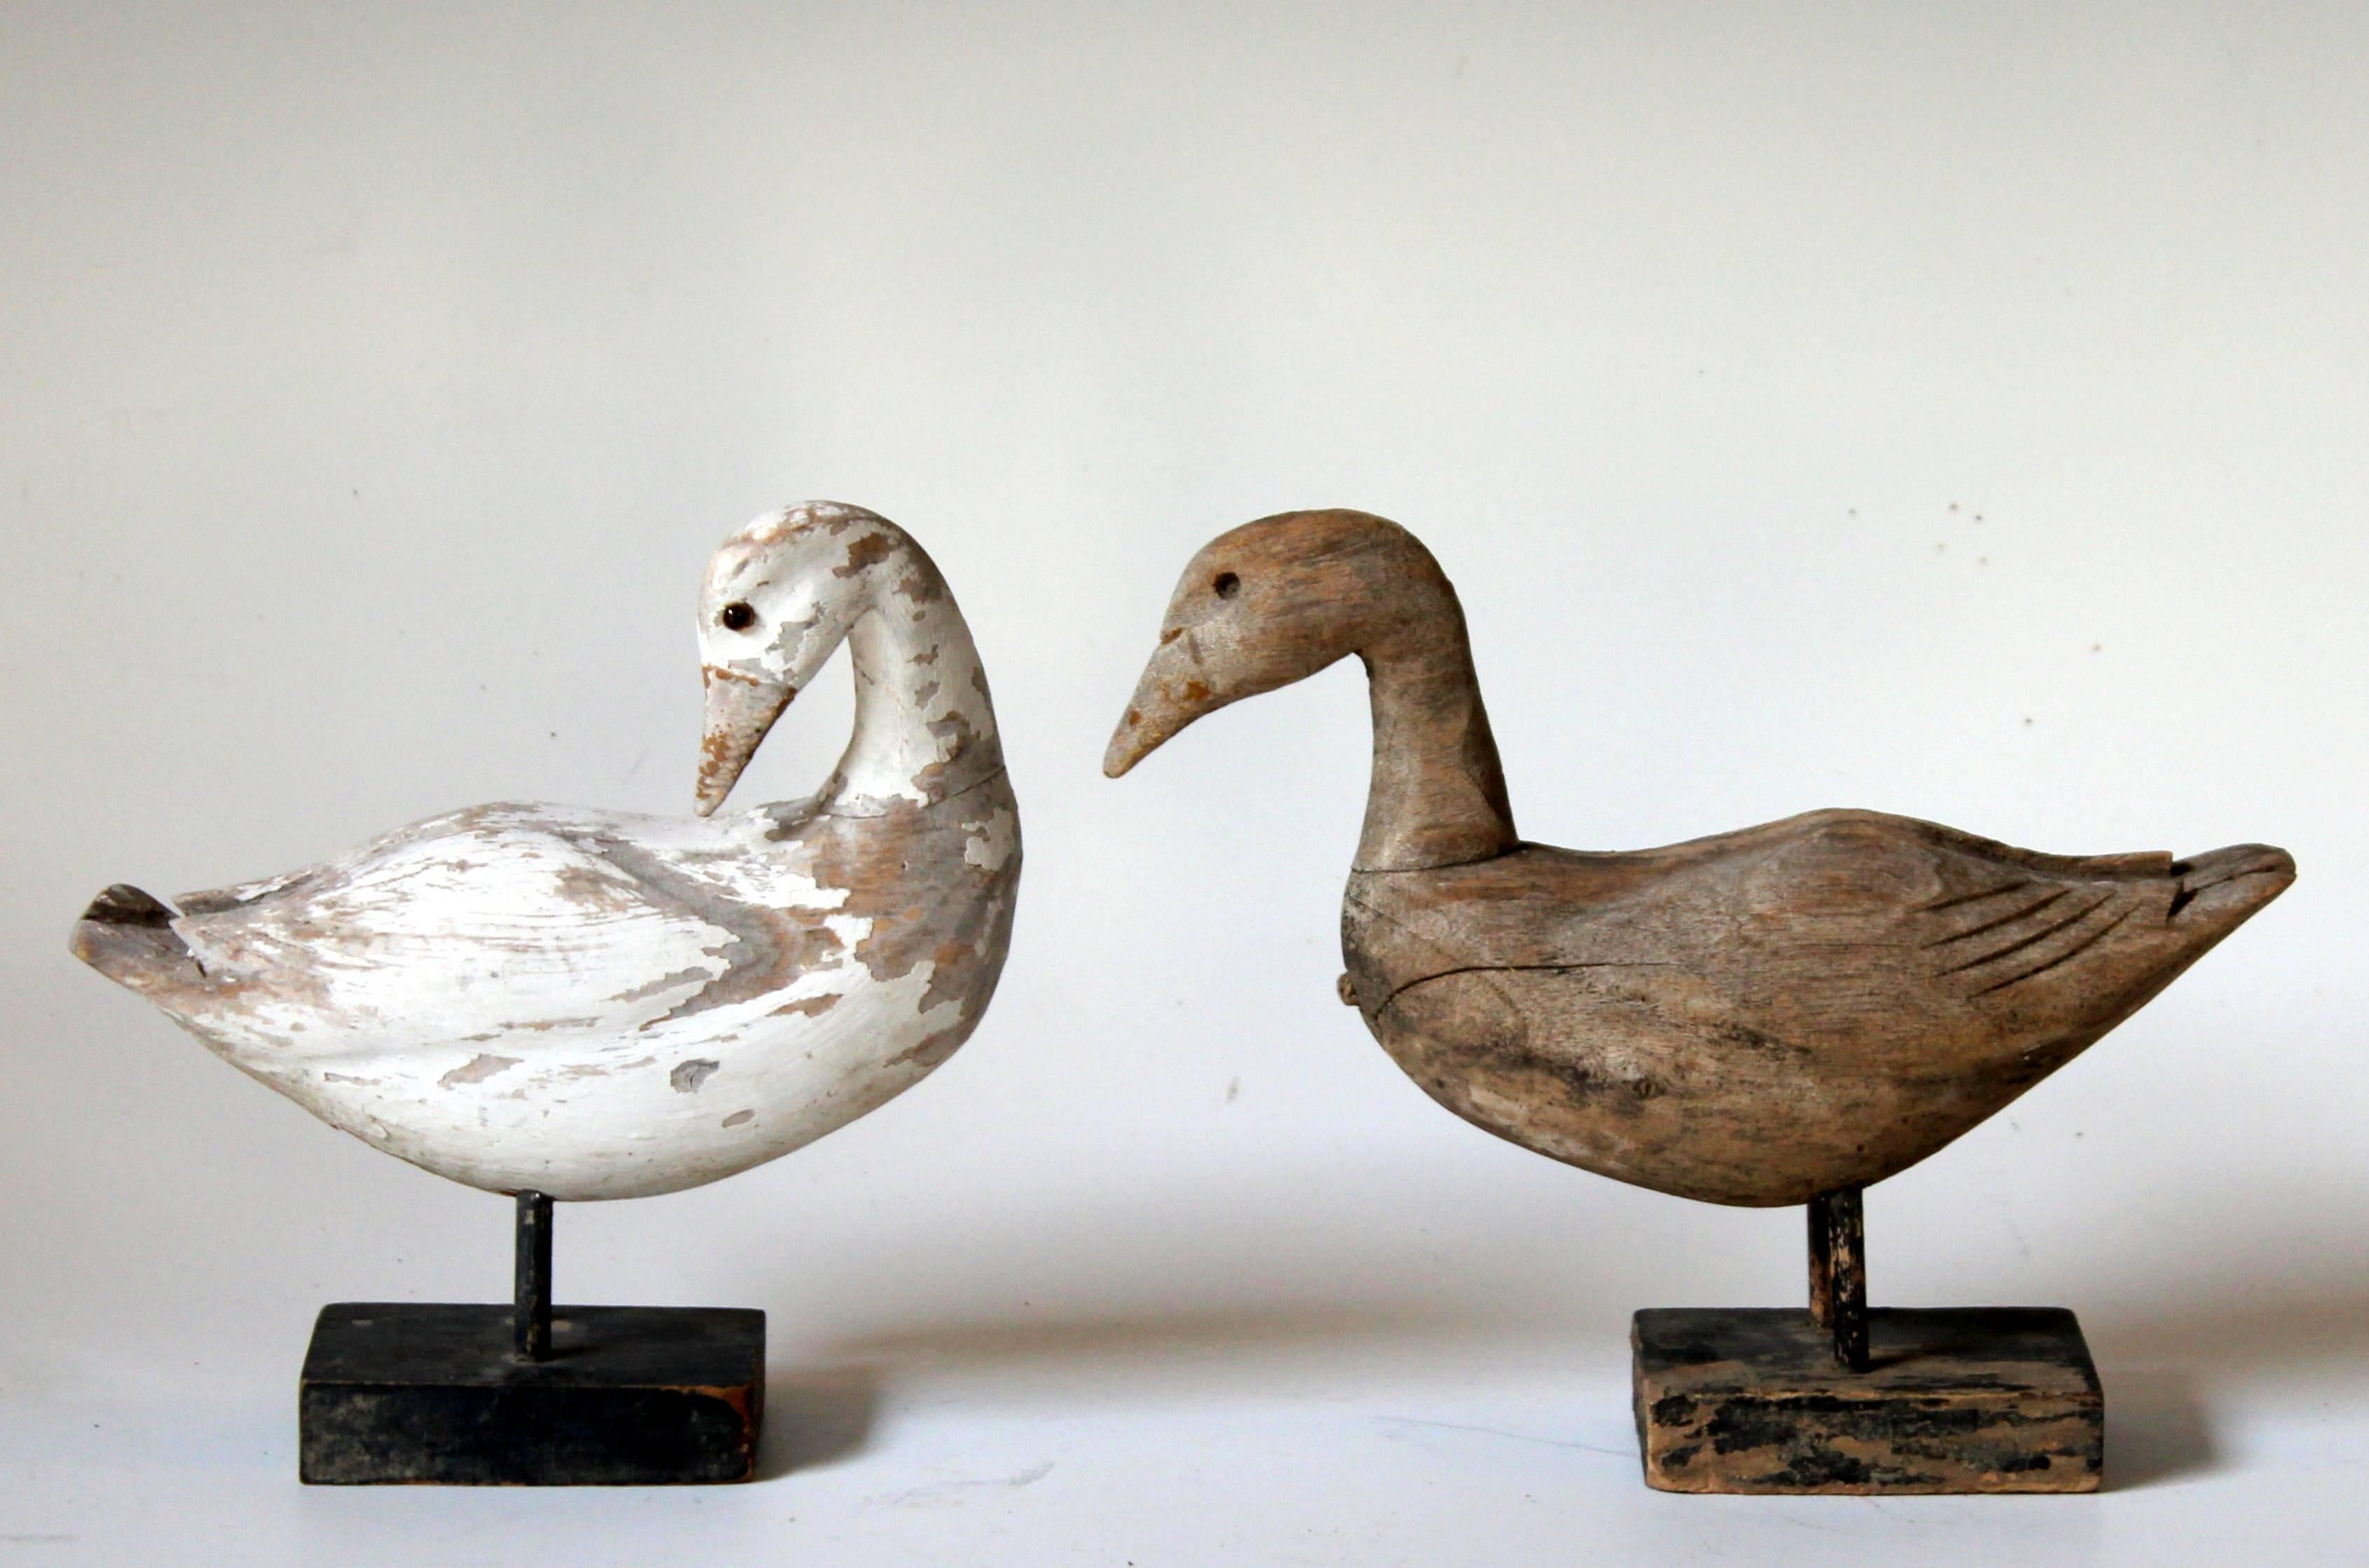 Pair of old vintage carved painted wood duck figures on stands. One retaining glass eyes and most of painted finish, the other missing eyes and with finish worn away. Charming and whimsical folk art pair. Each 6 3/4